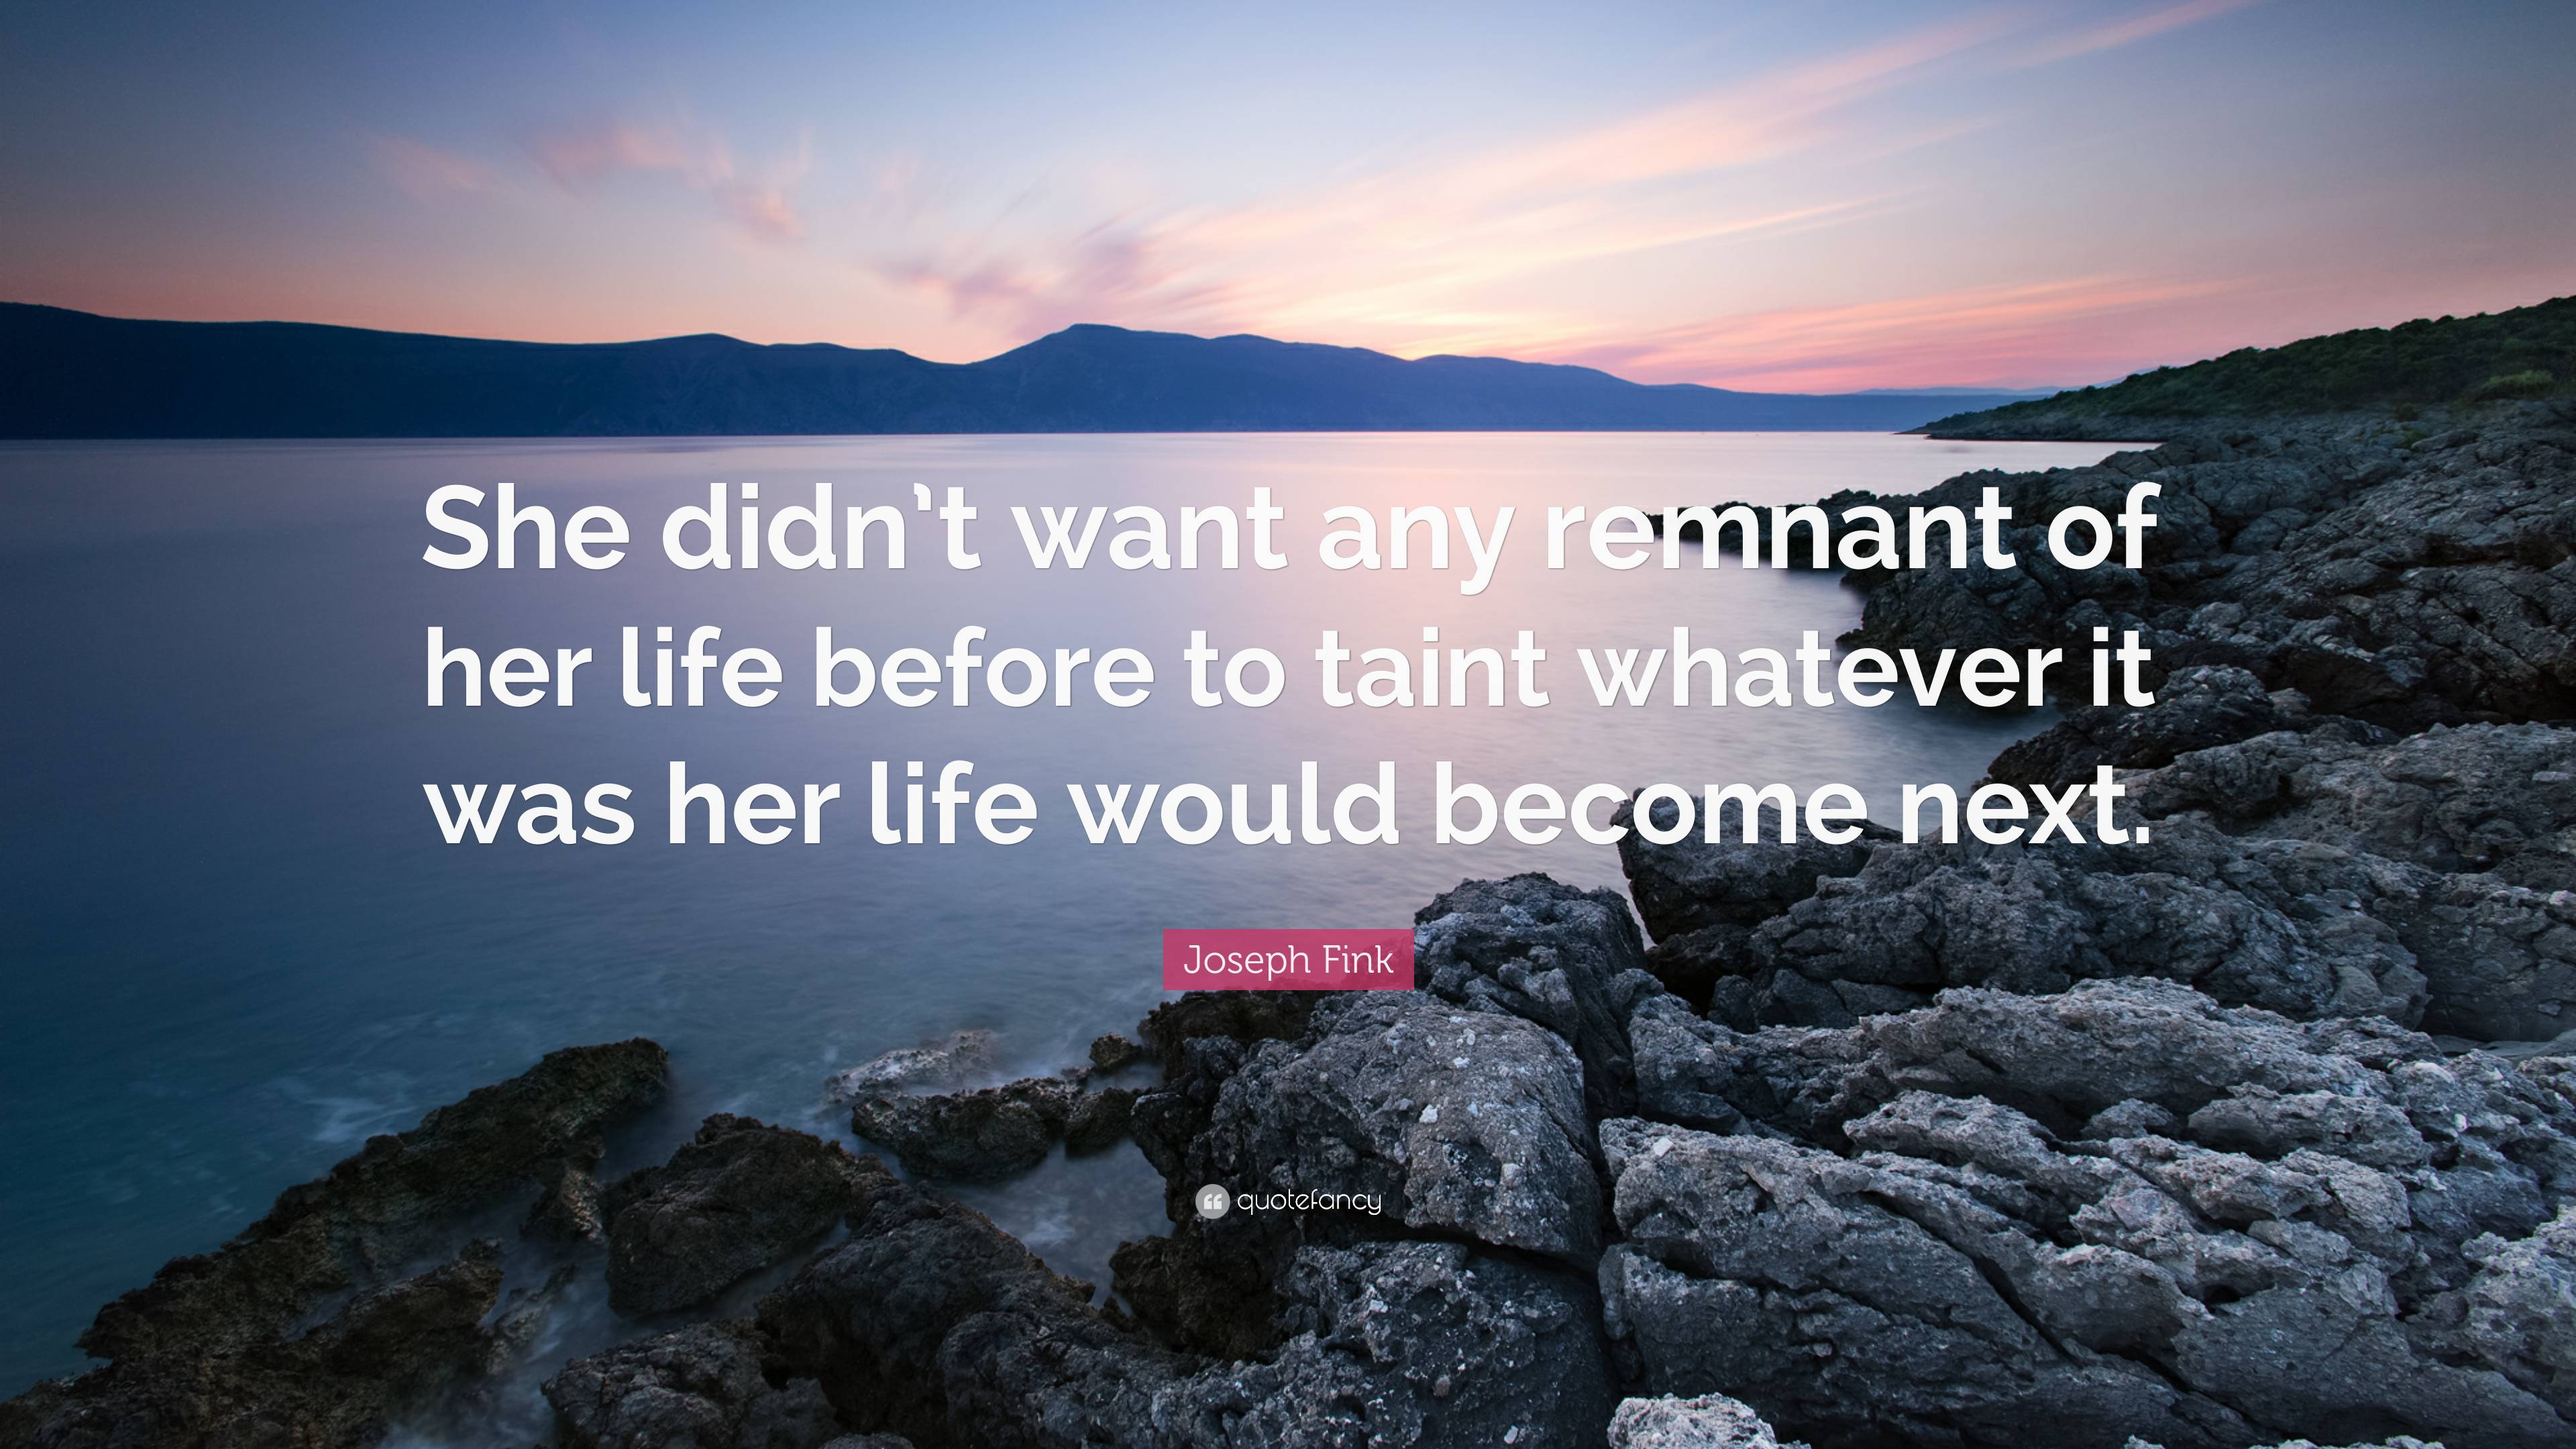 Joseph Fink Quote: “She didn’t want any remnant of her life before to ...